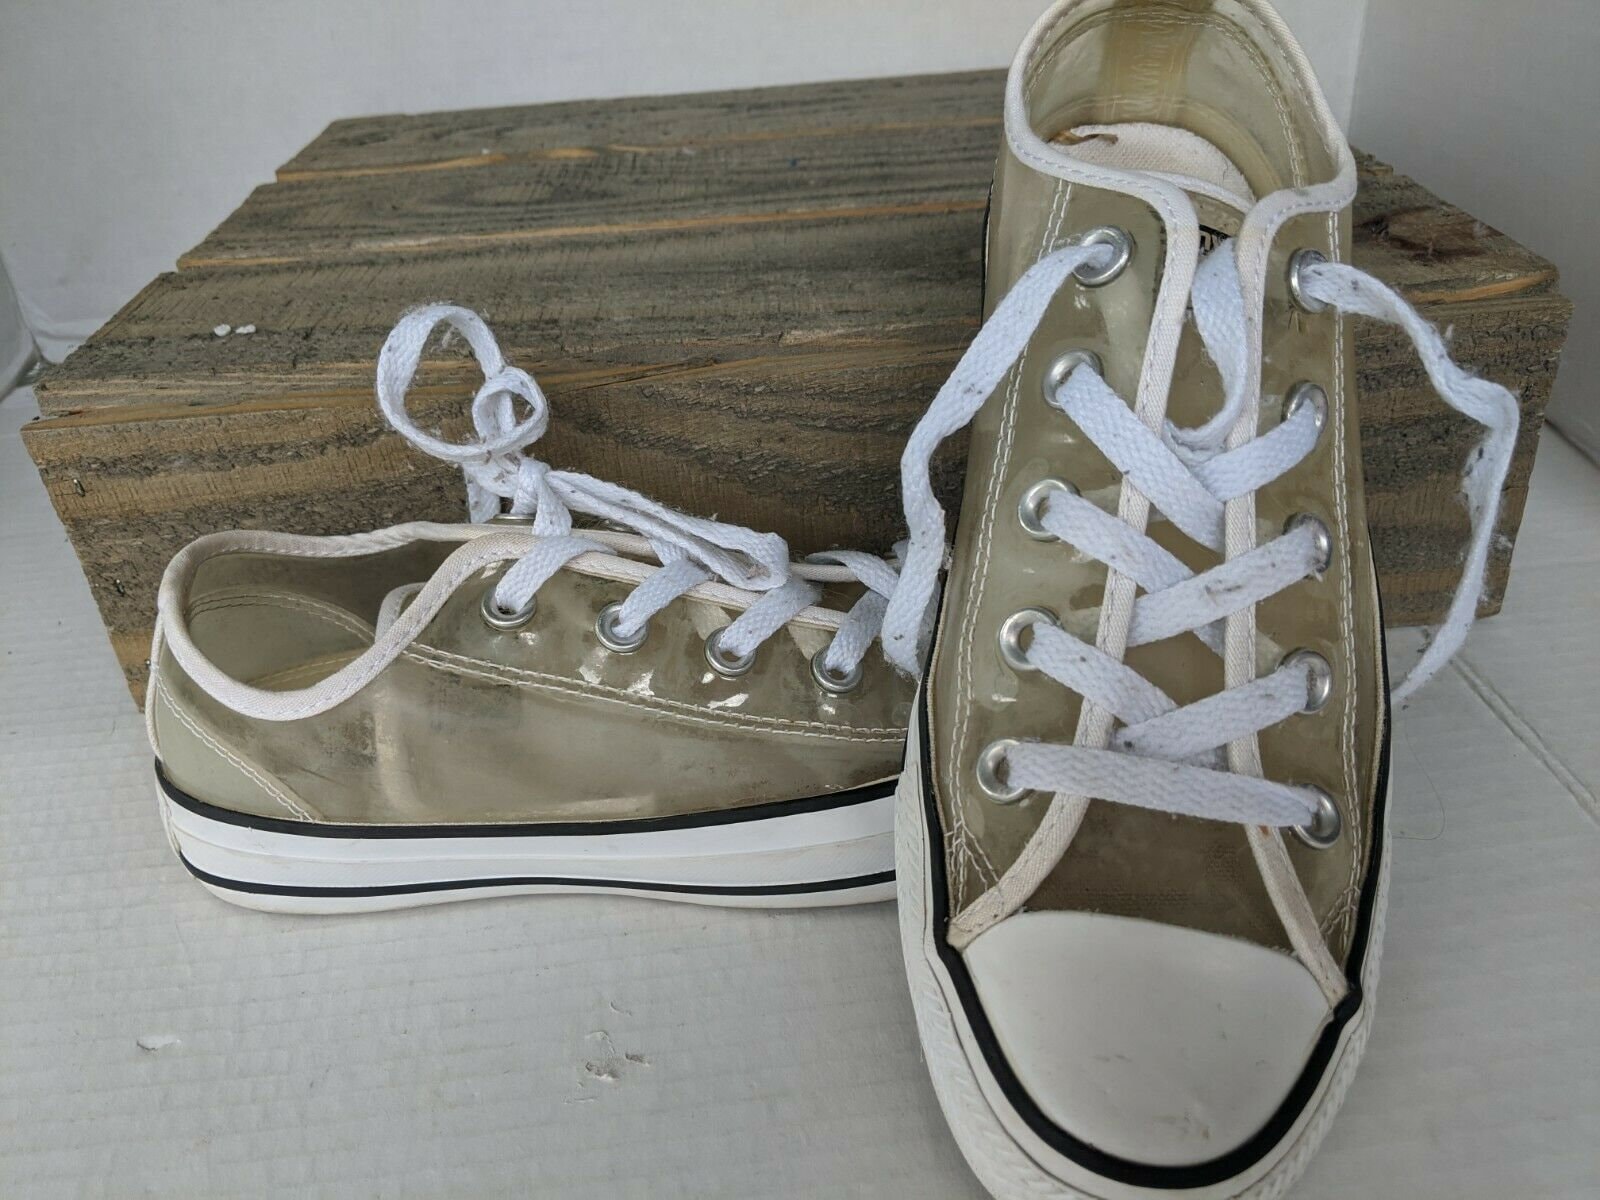 Learn about 73+ imagen converse chuck taylor clear - In.thptnganamst.edu.vn